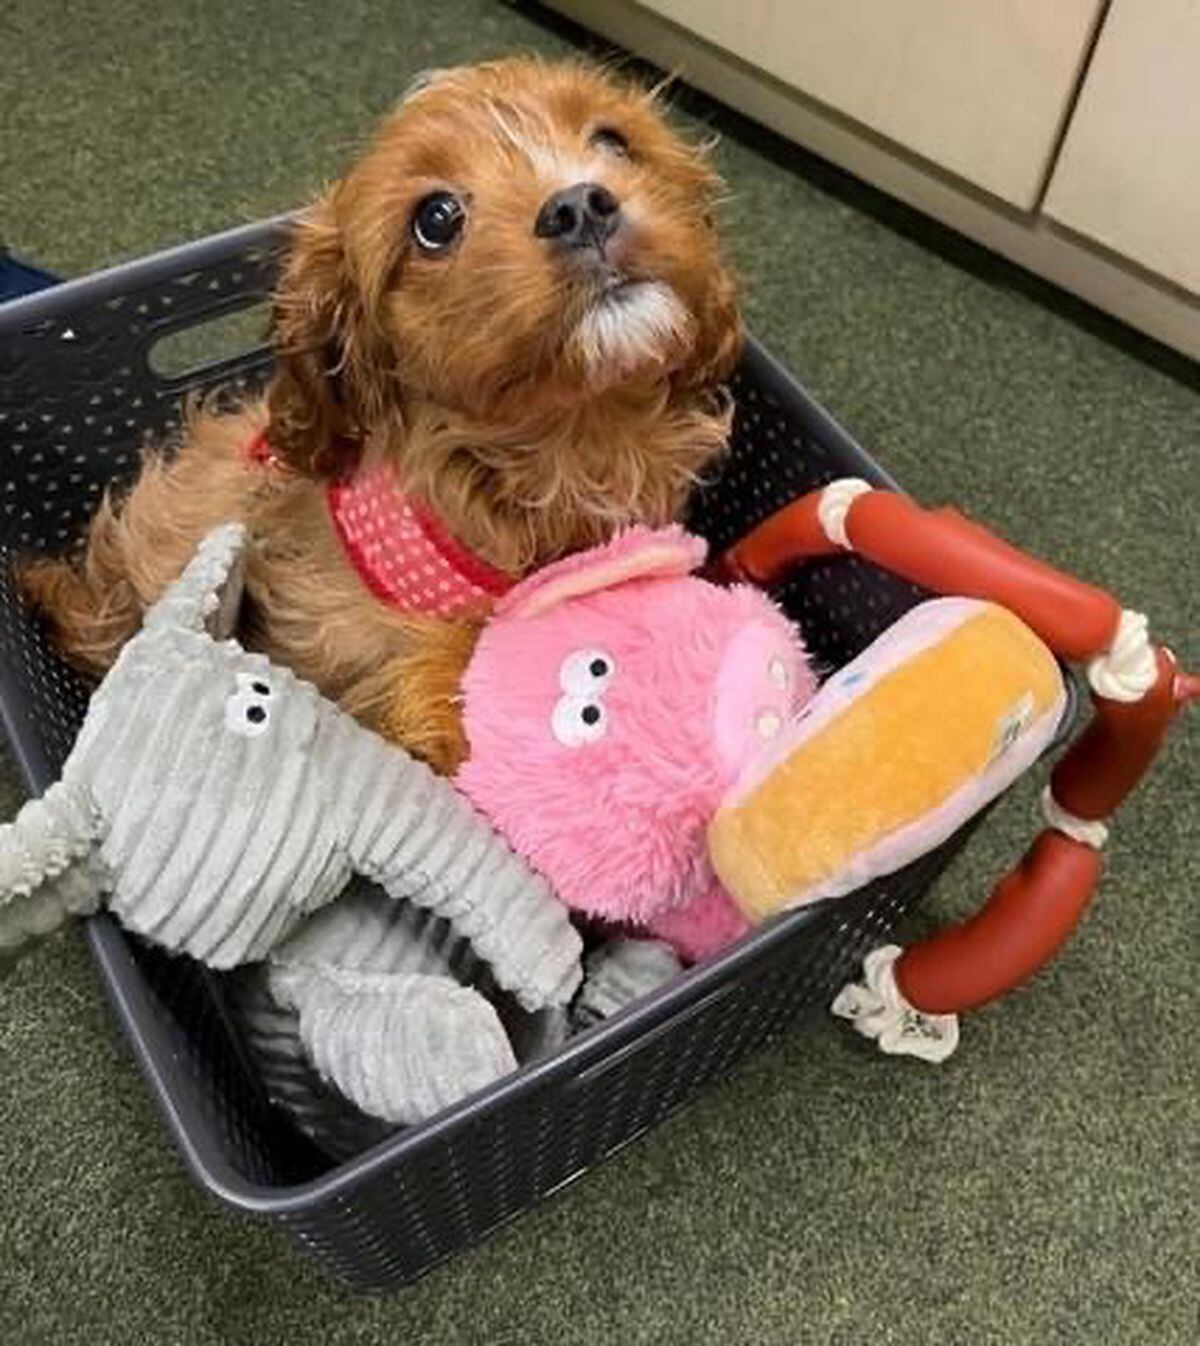 Rufus in his toy box